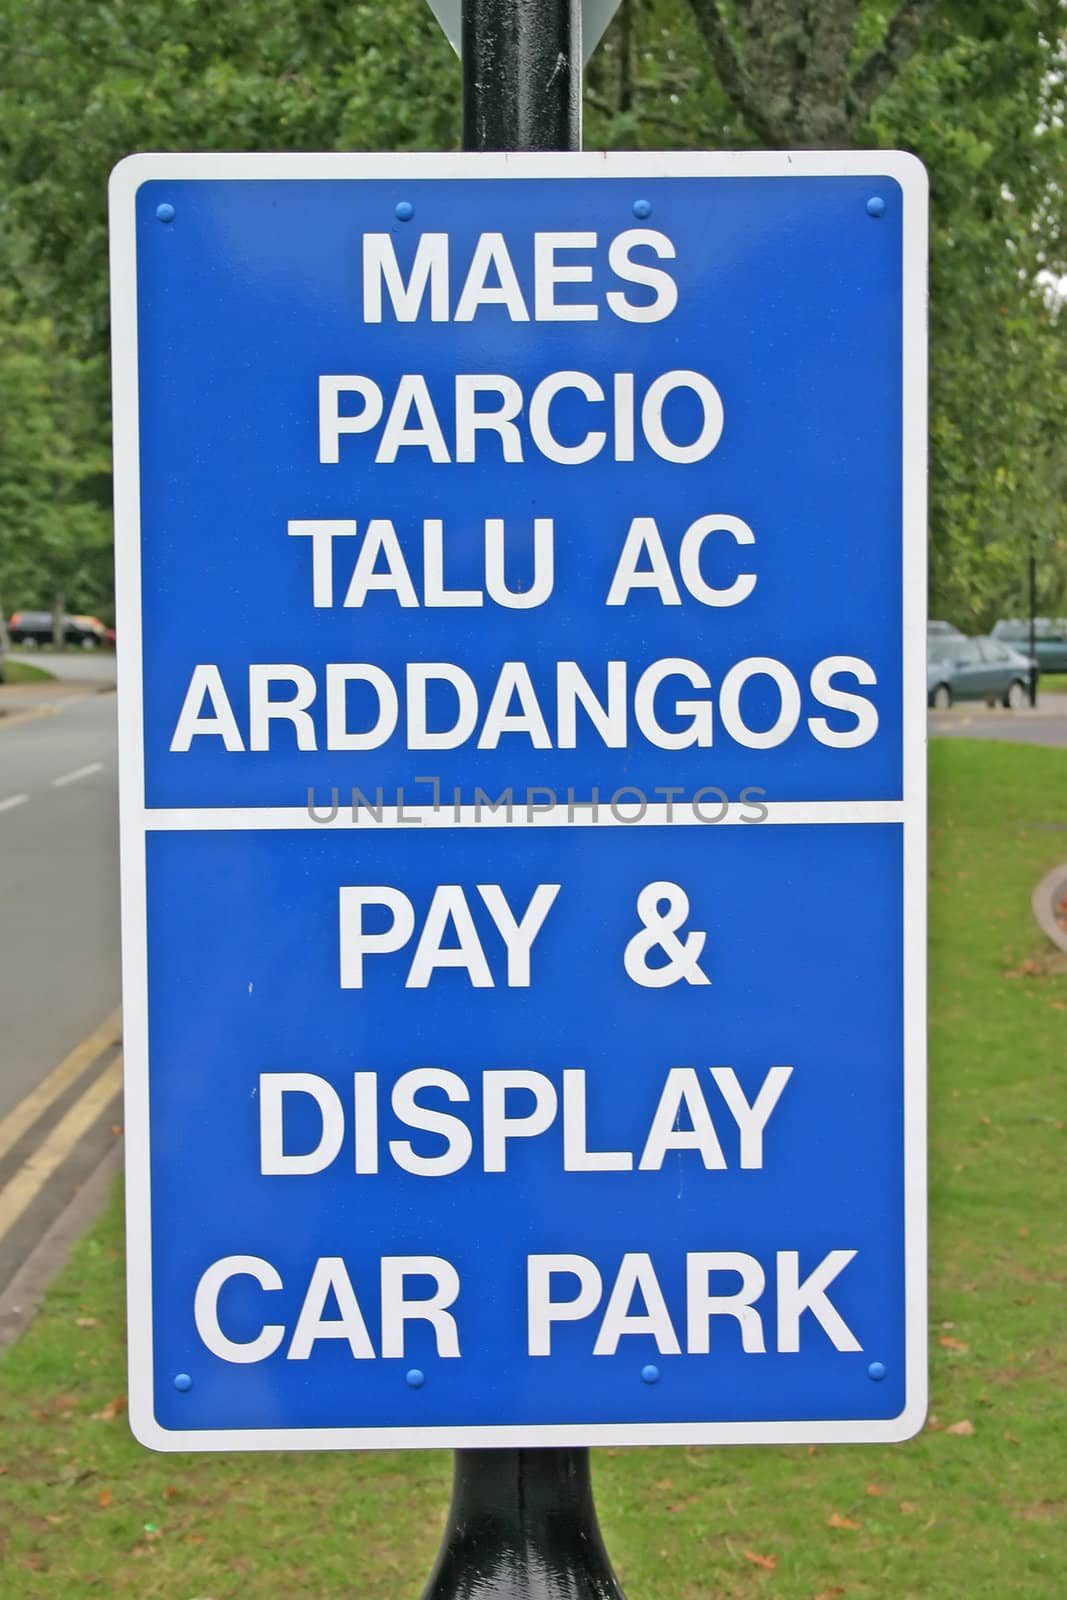 Bilingual English Welsh Car Park Signage by green308